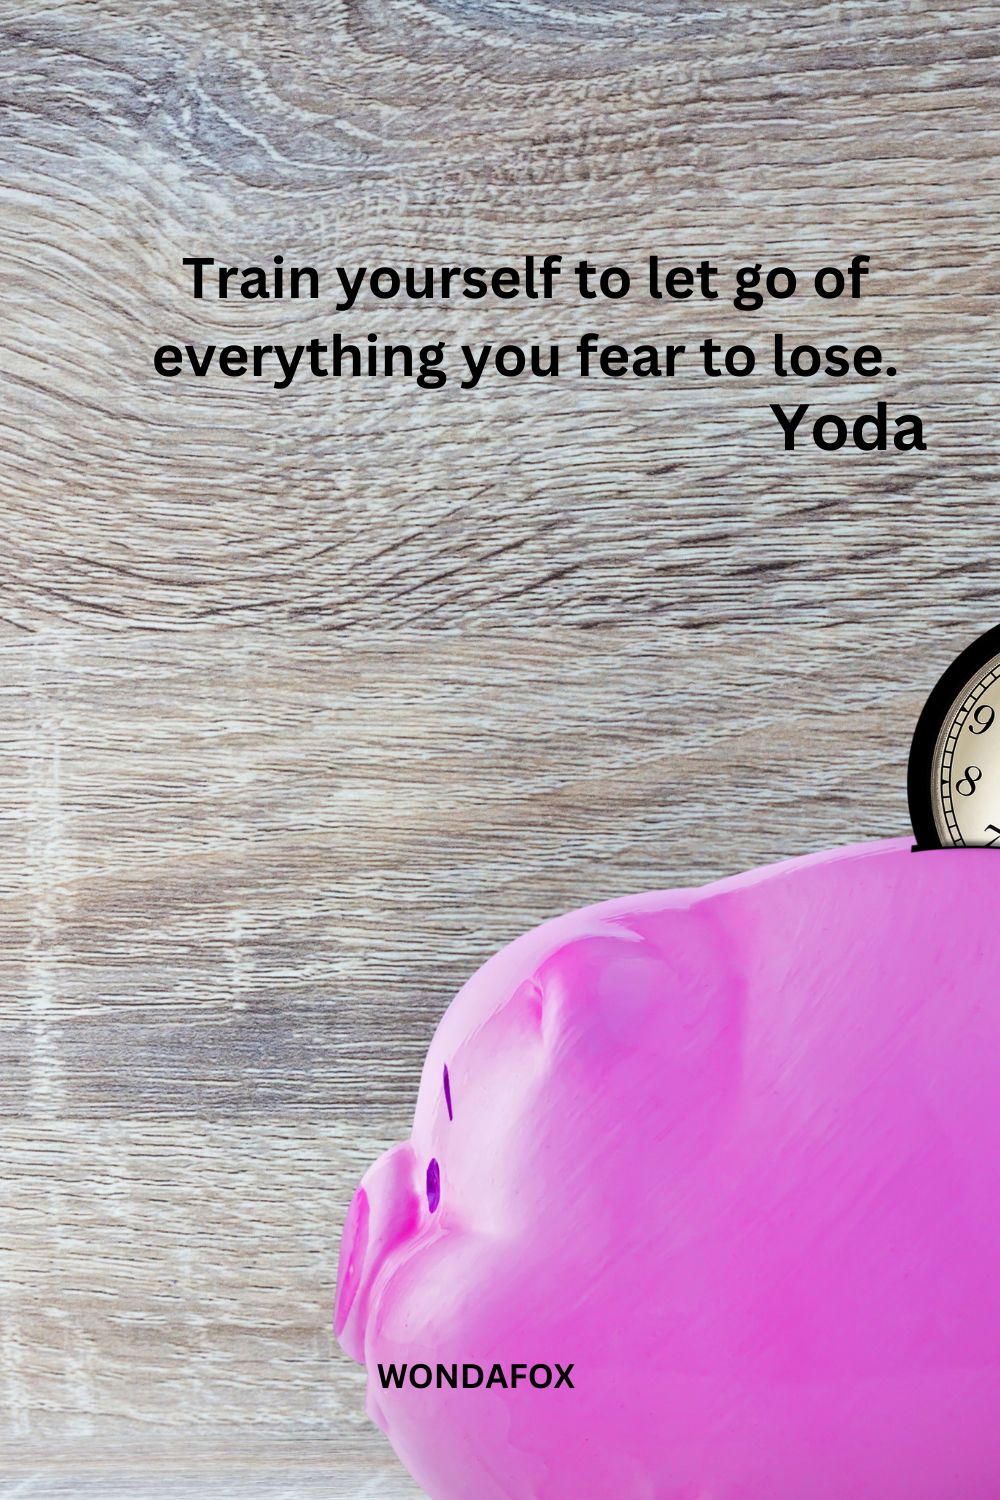 Train yourself to let go of everything you fear to lose.
Yoda